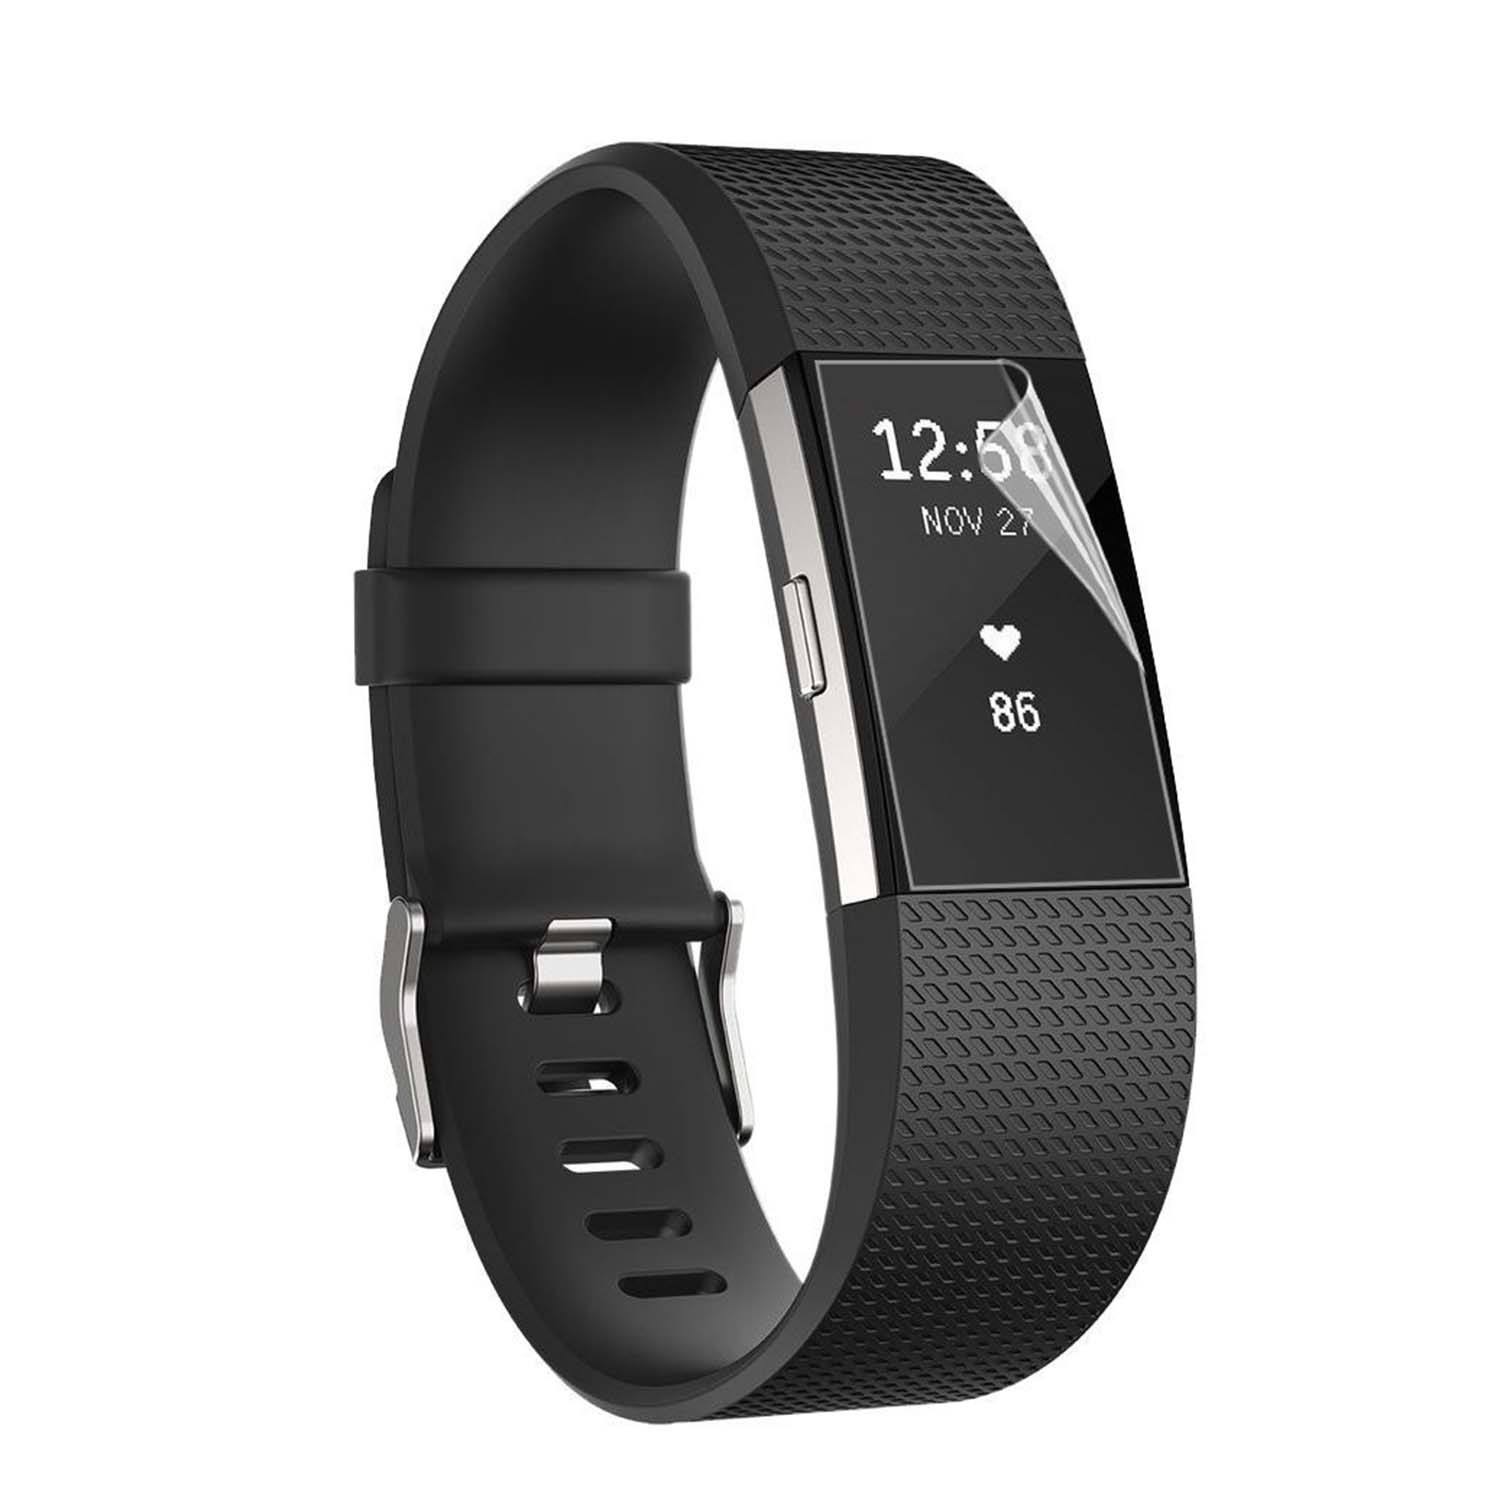 screen protector for fitbit charge 2